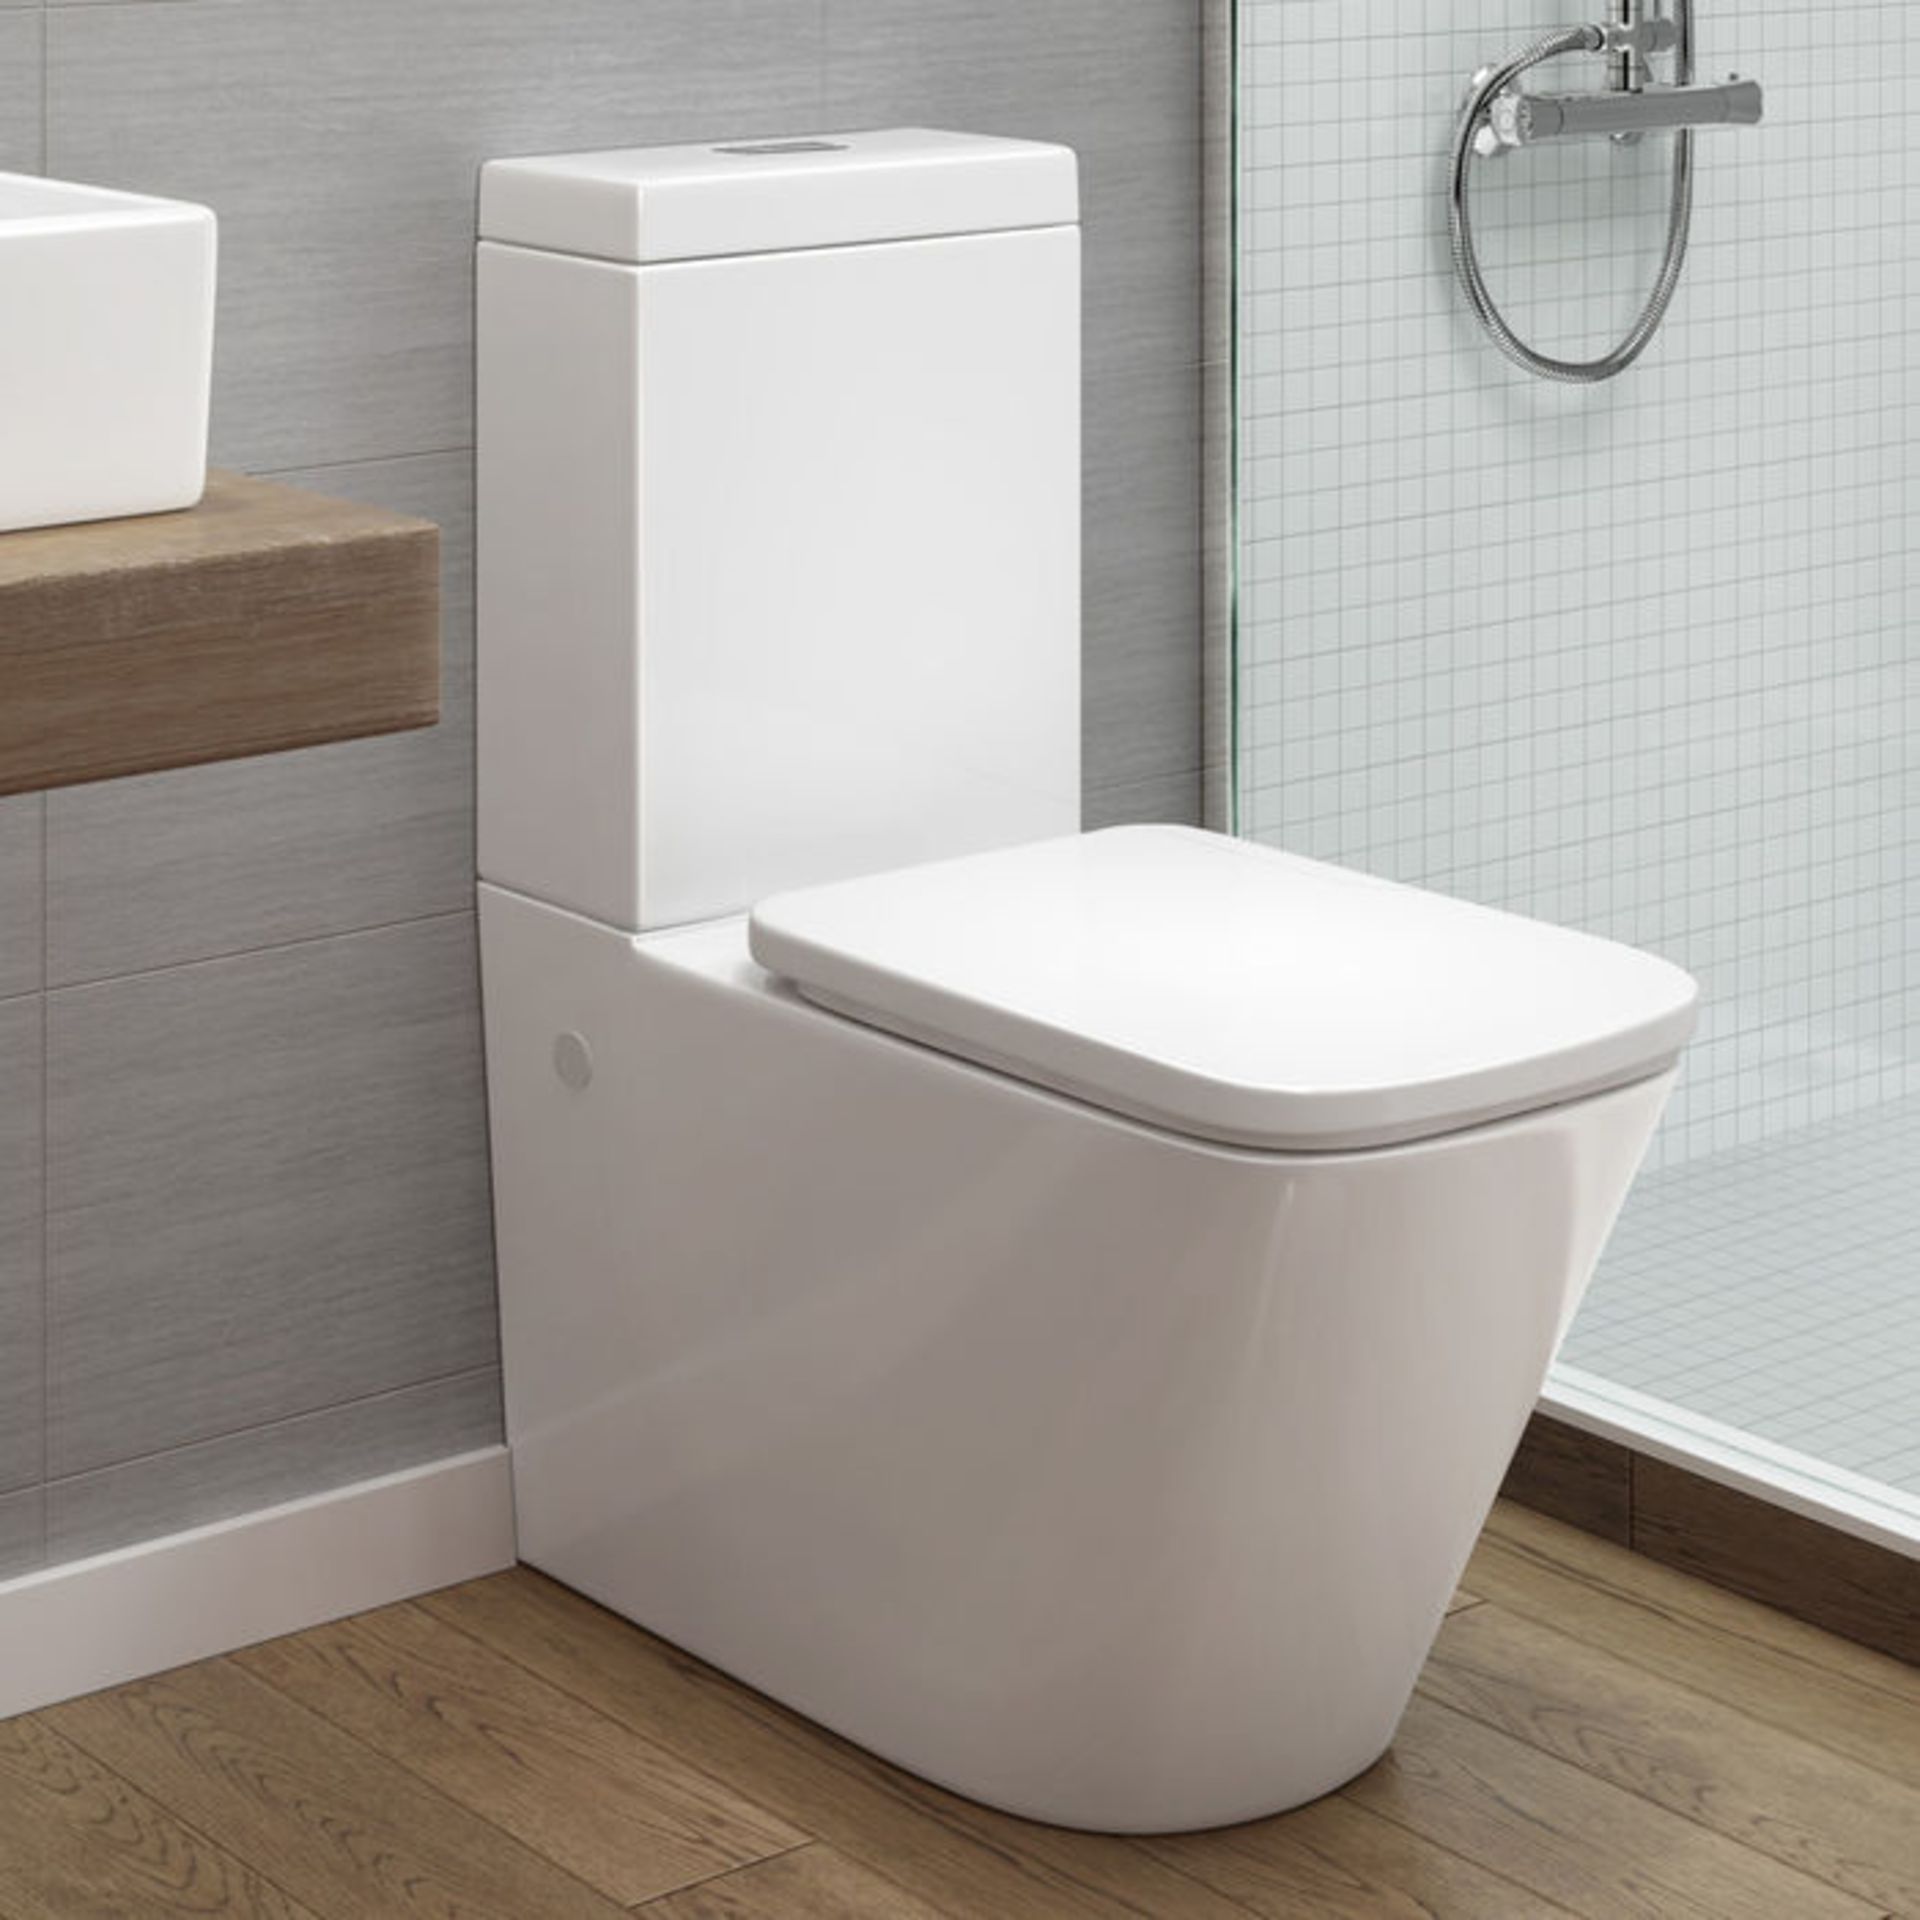 (P254) Florence Close Coupled Toilet & Cistern inc Soft Close Seat. Contemporary design finished